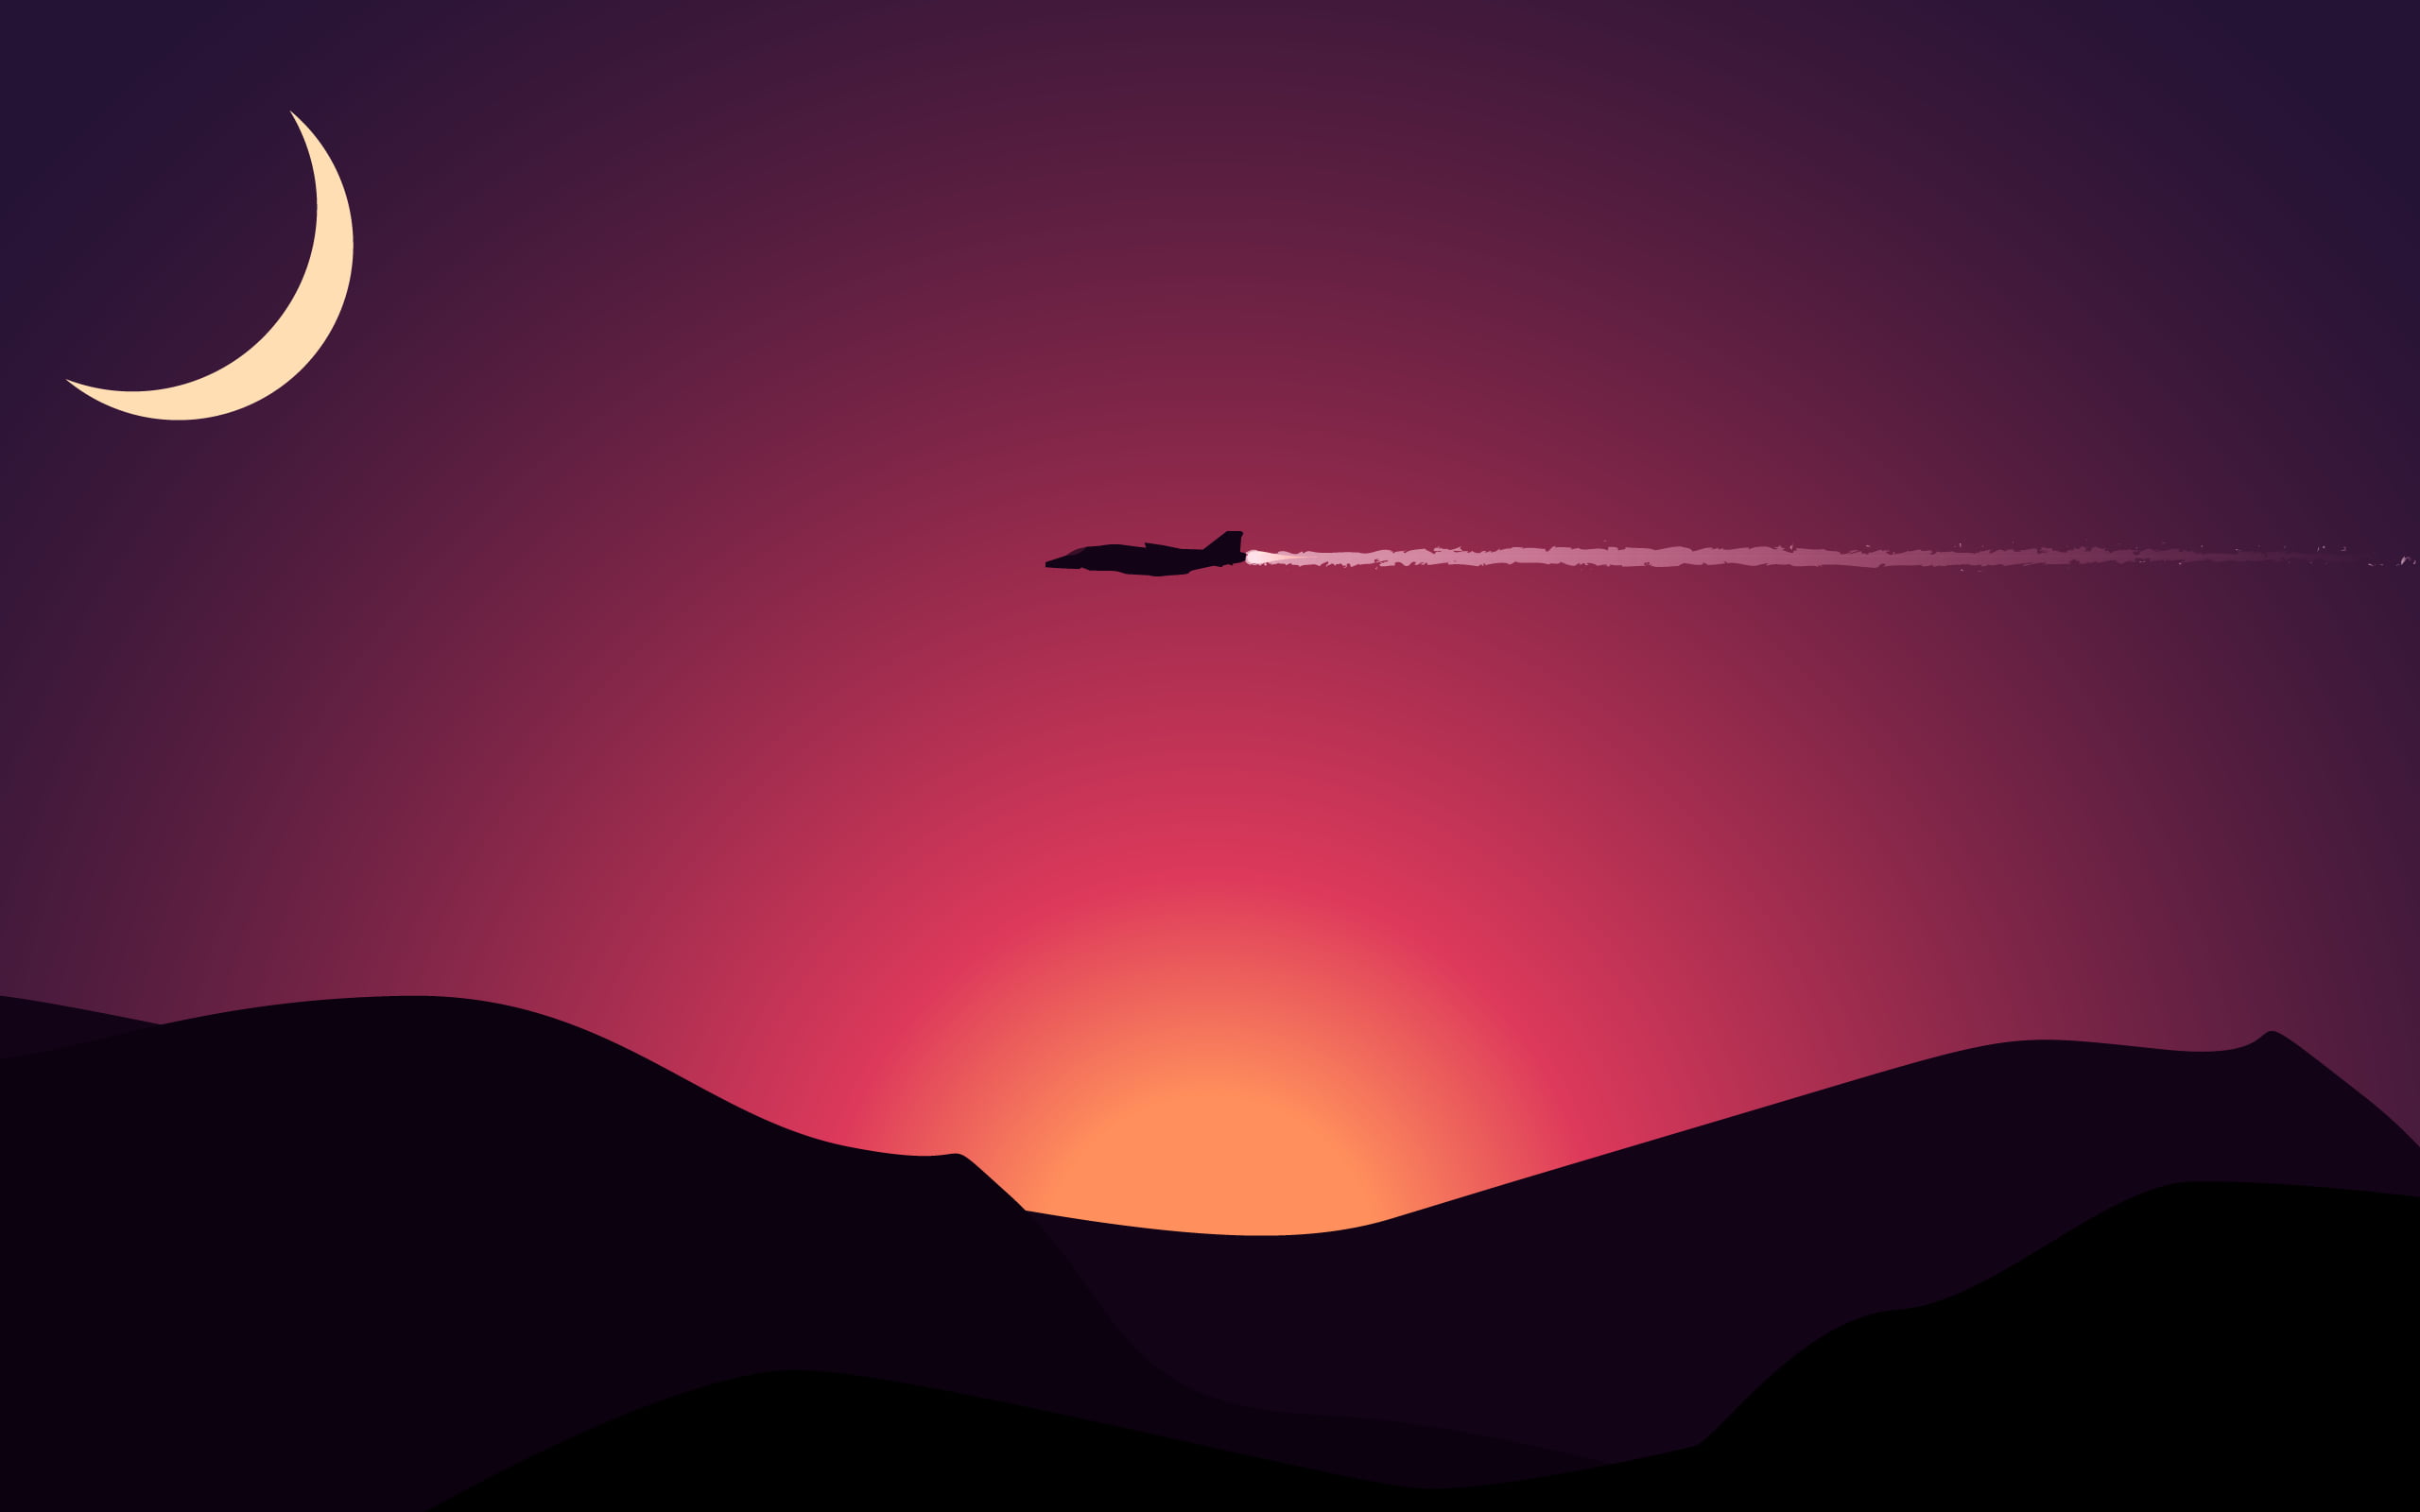 black plane illustration, airplane above mountains with sunset under crescent moon